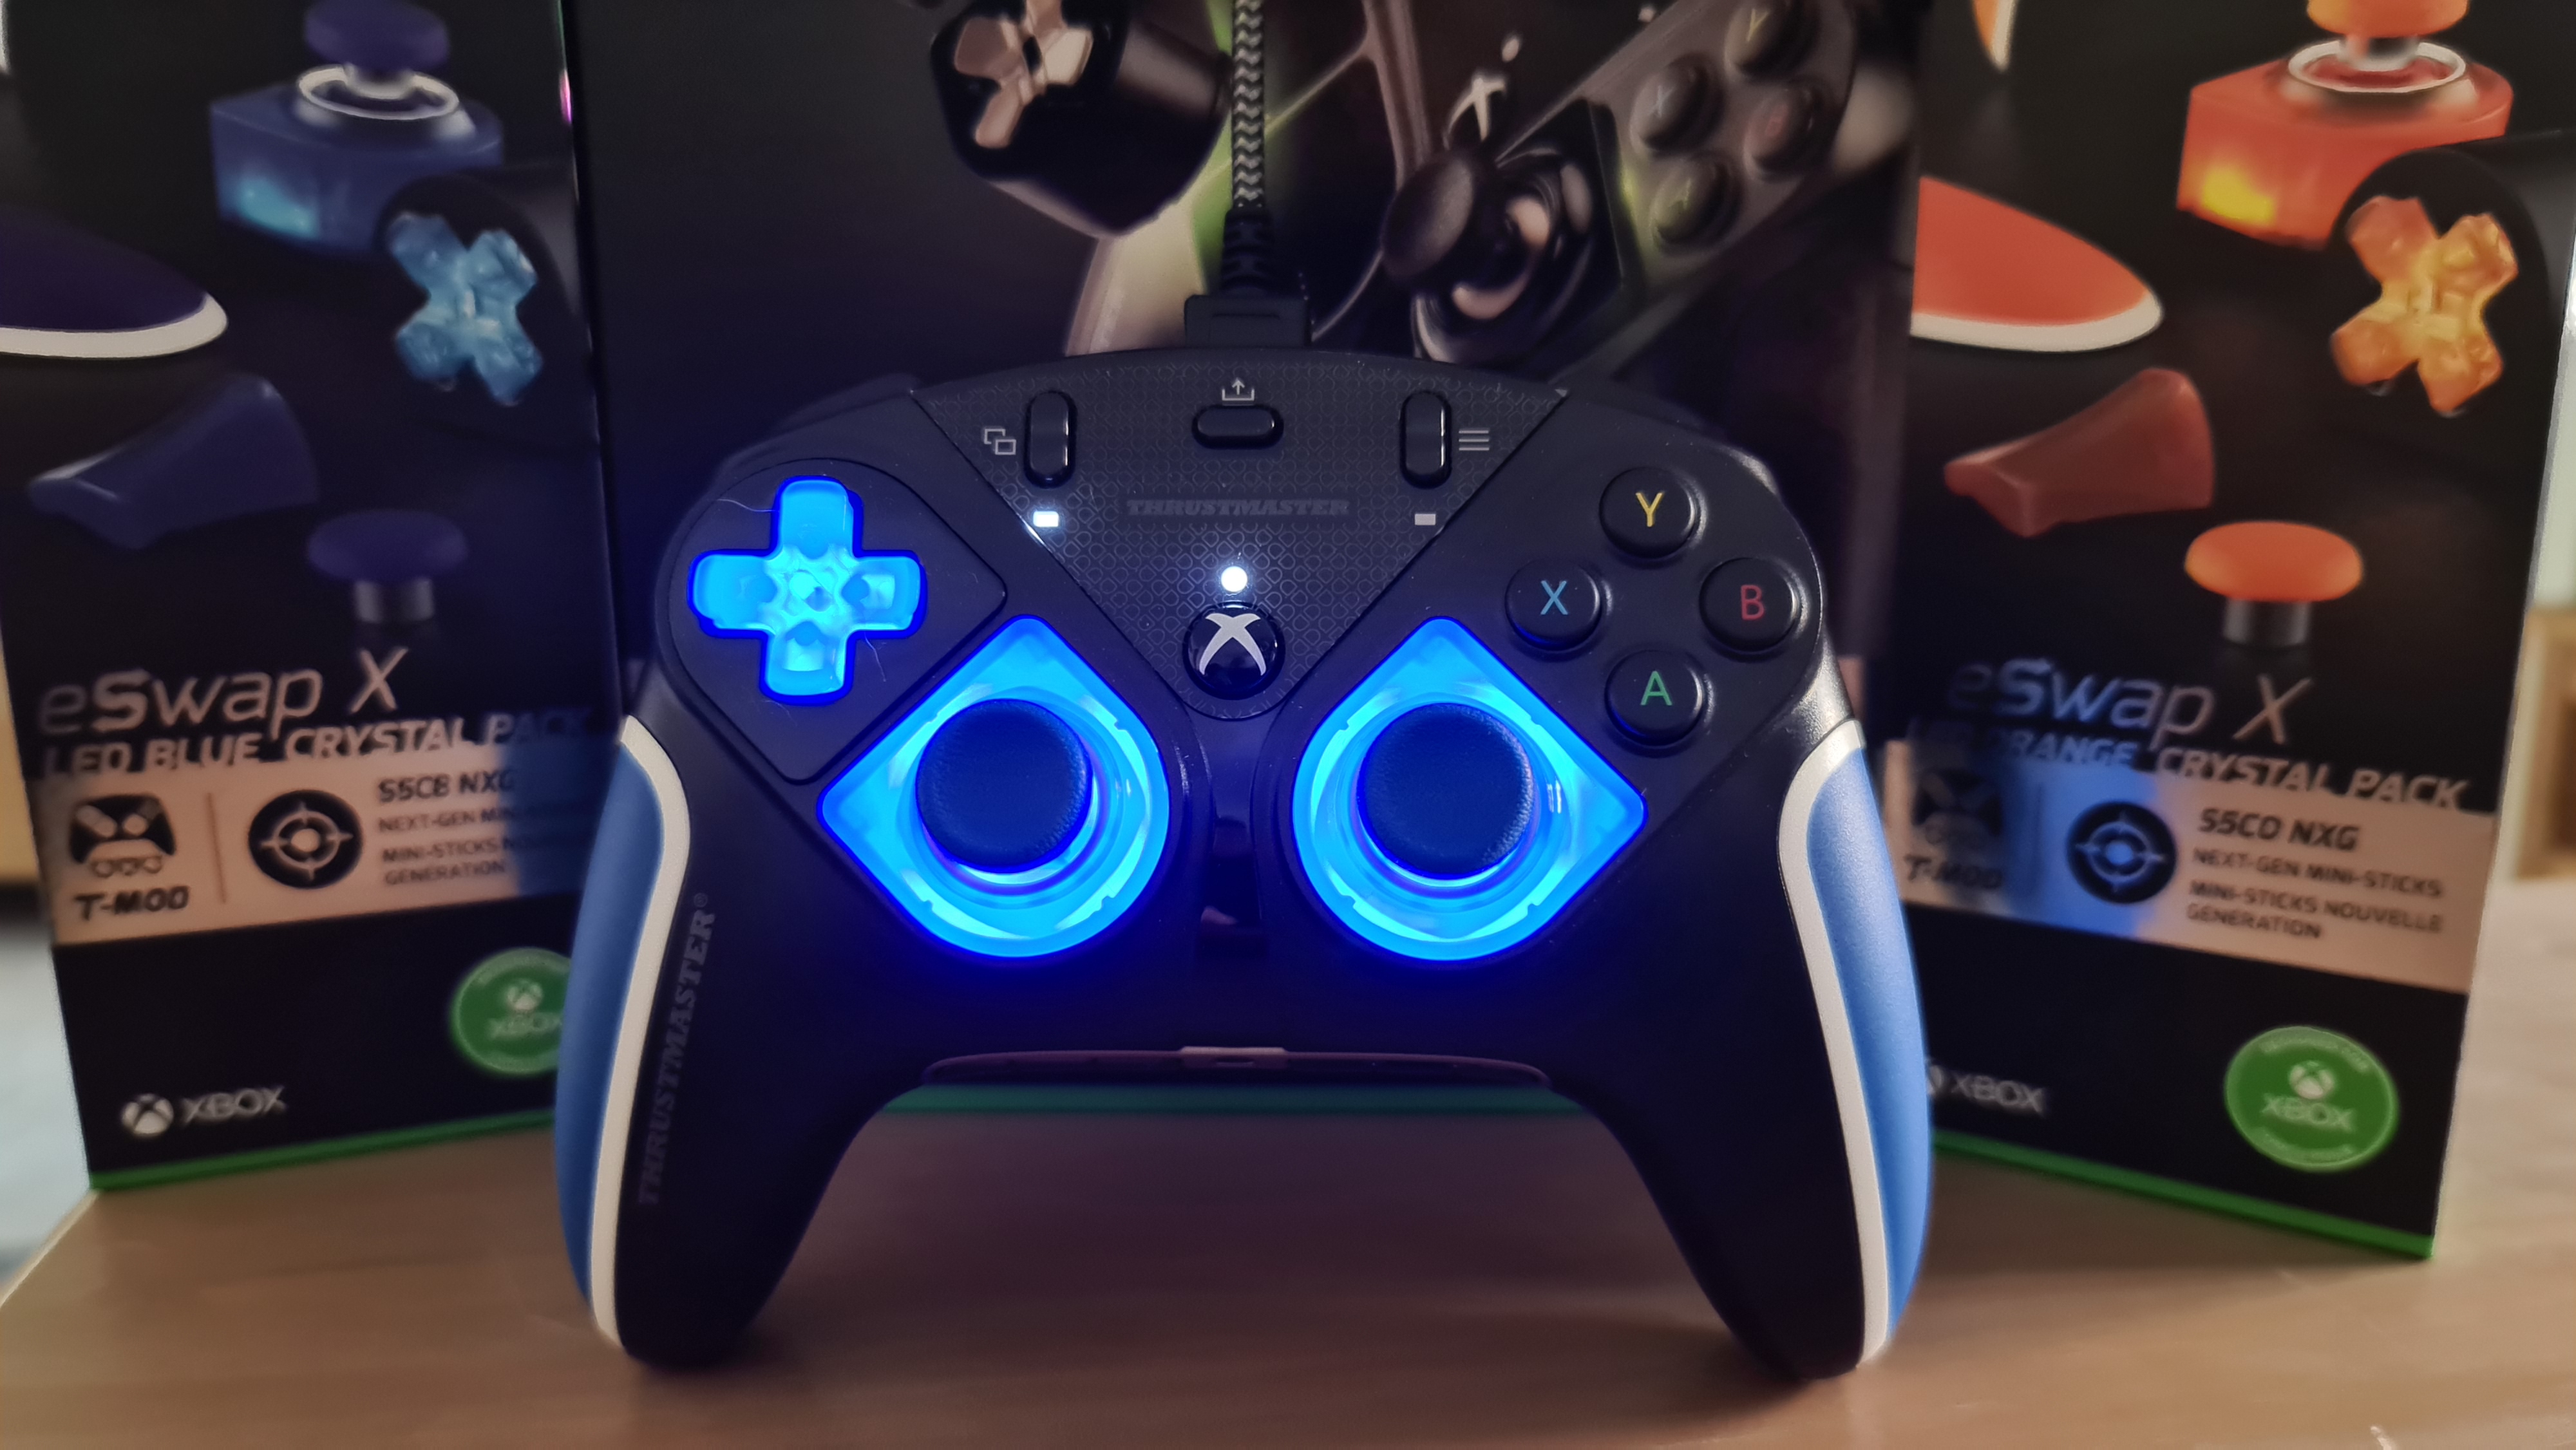 Thrustmaster's new LED modules mean my controller is now cooler